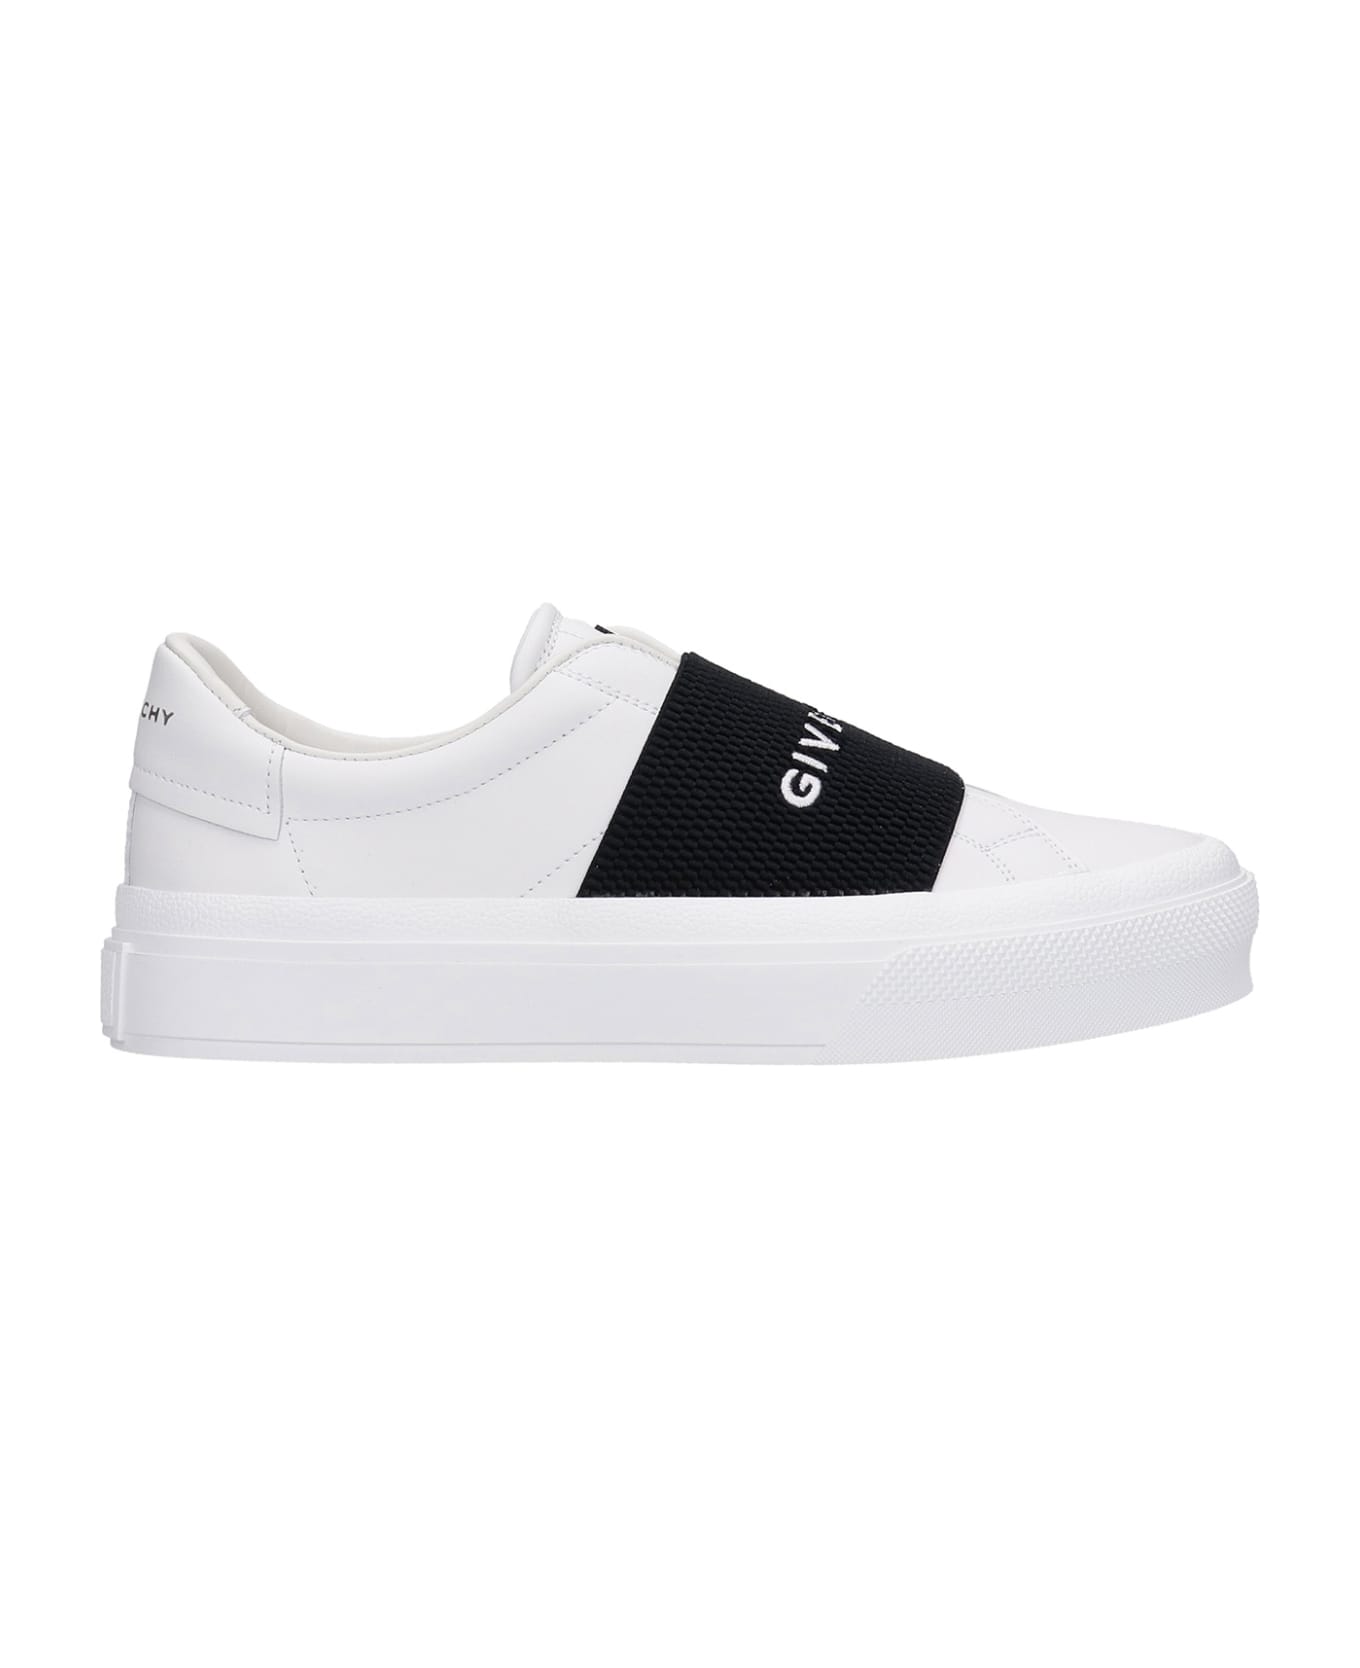 Givenchy Sneakers In White Leather